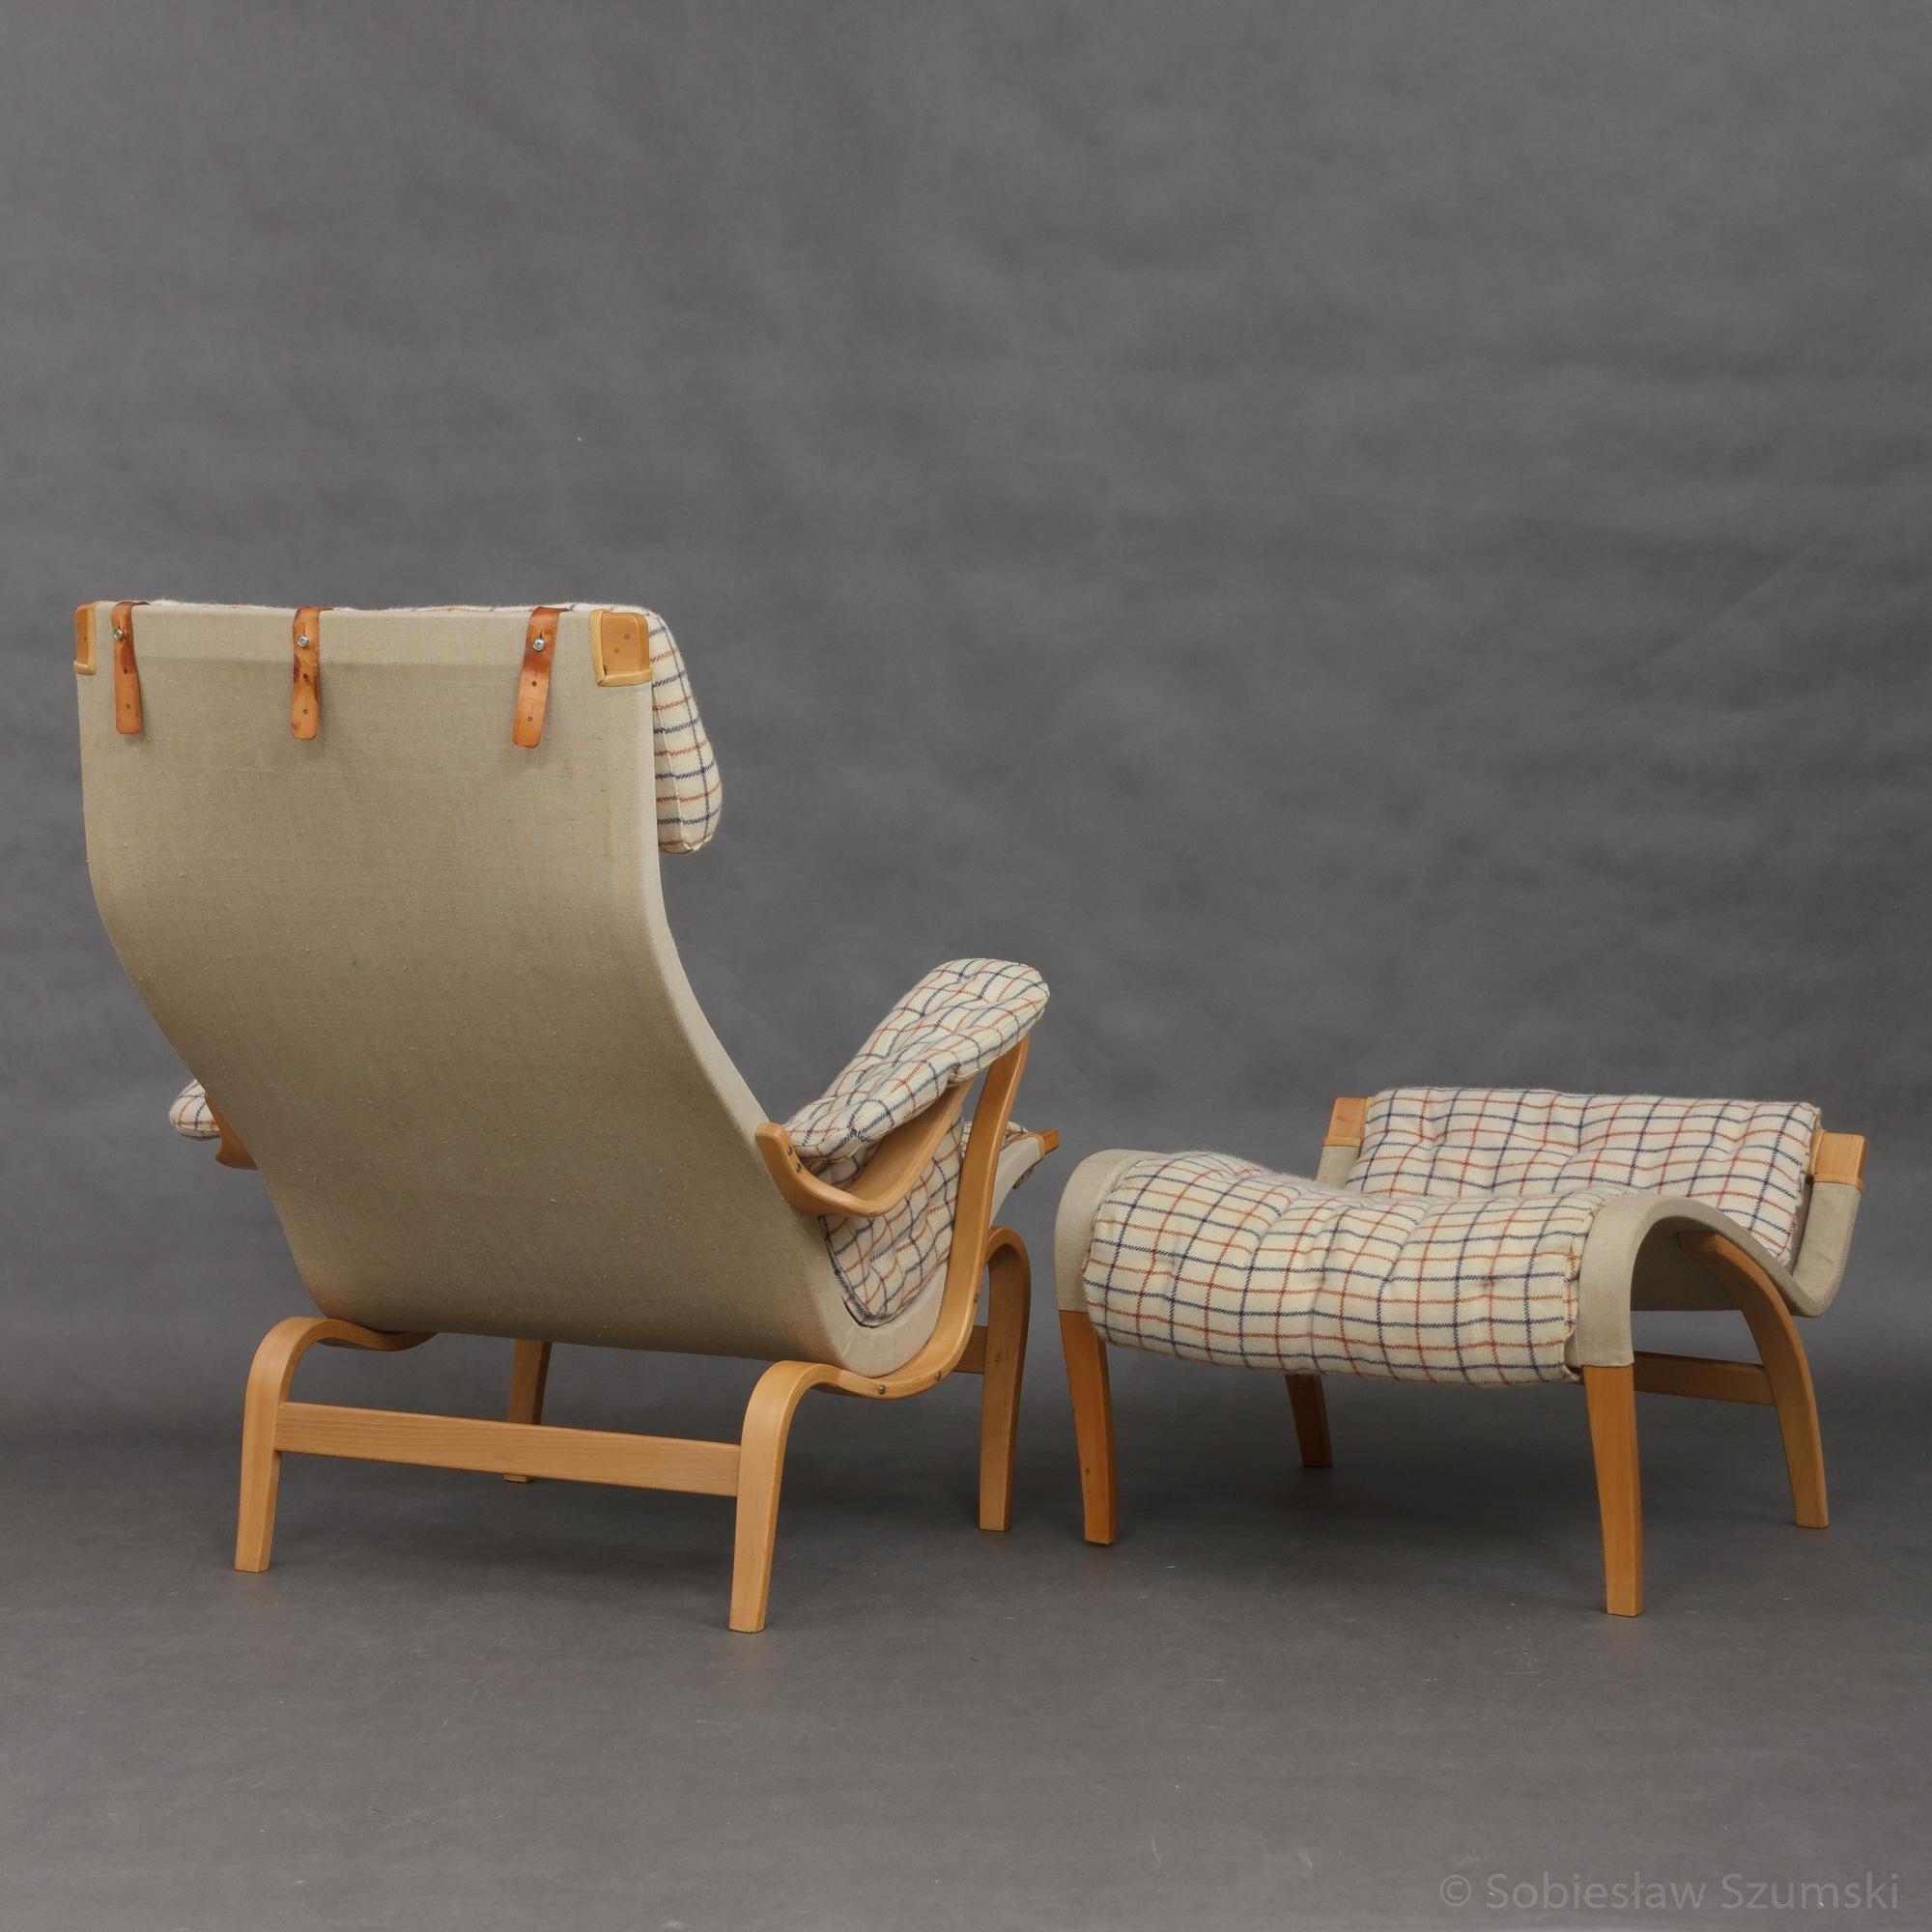 An improved version of Pernilla chair from the 1960s, originally designed by Bruno Mathsson in Sweden in 1944. It is made of curved beech plywood, canvas, and an original wool cushions. Imprinted: Dux. Ottoman measurements:
41 H x 62 x 73 cm.